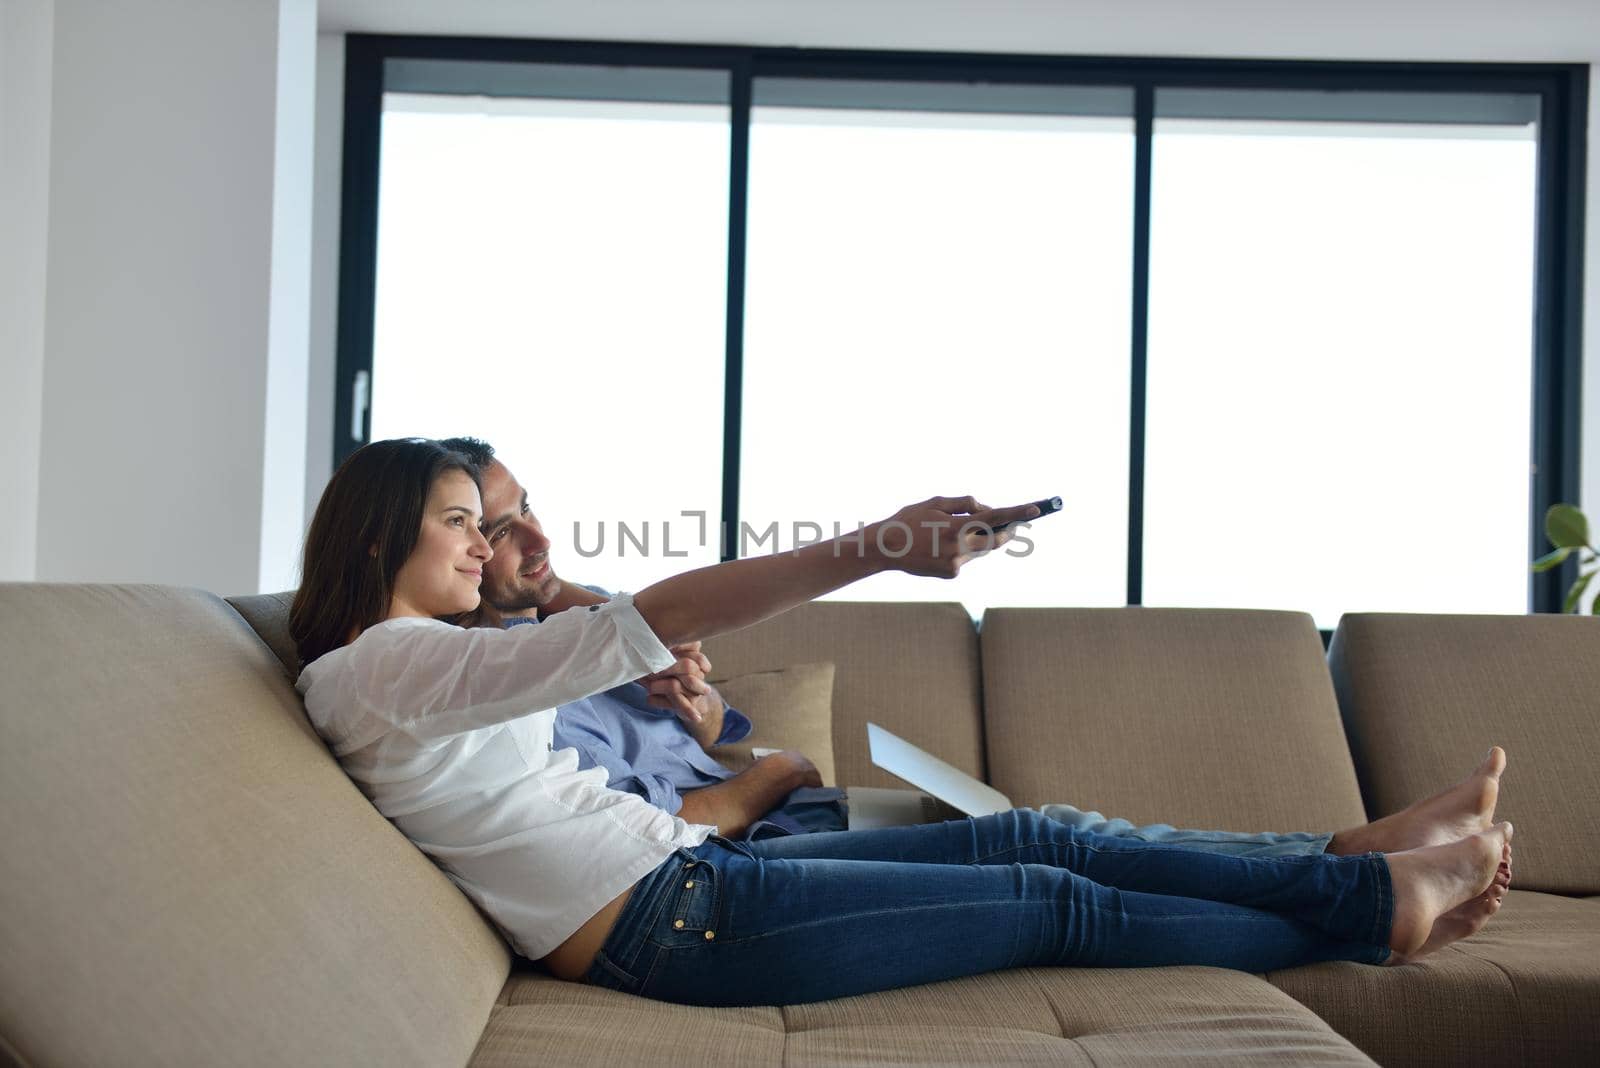 Couple on sofa with TV remote